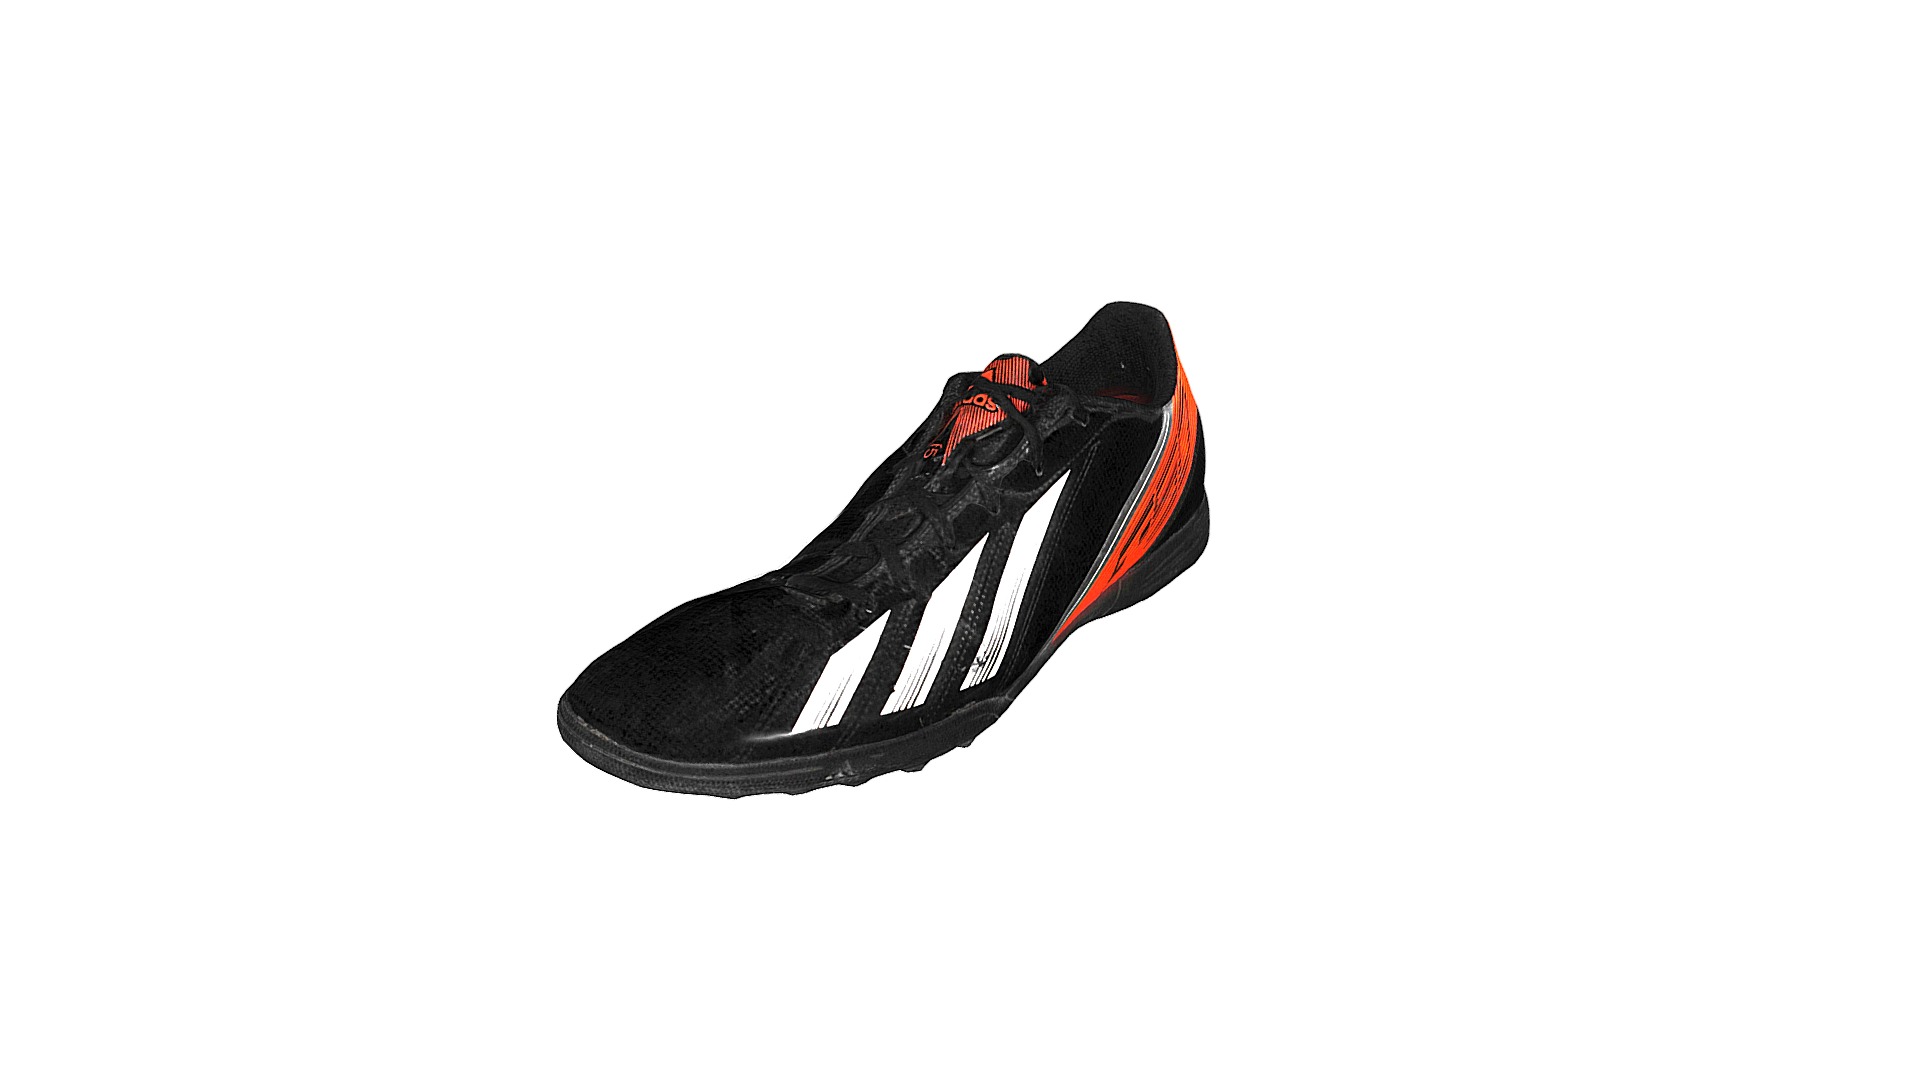 3D model Football Adidas Used - This is a 3D model of the Football Adidas Used. The 3D model is about a black and red shoe.